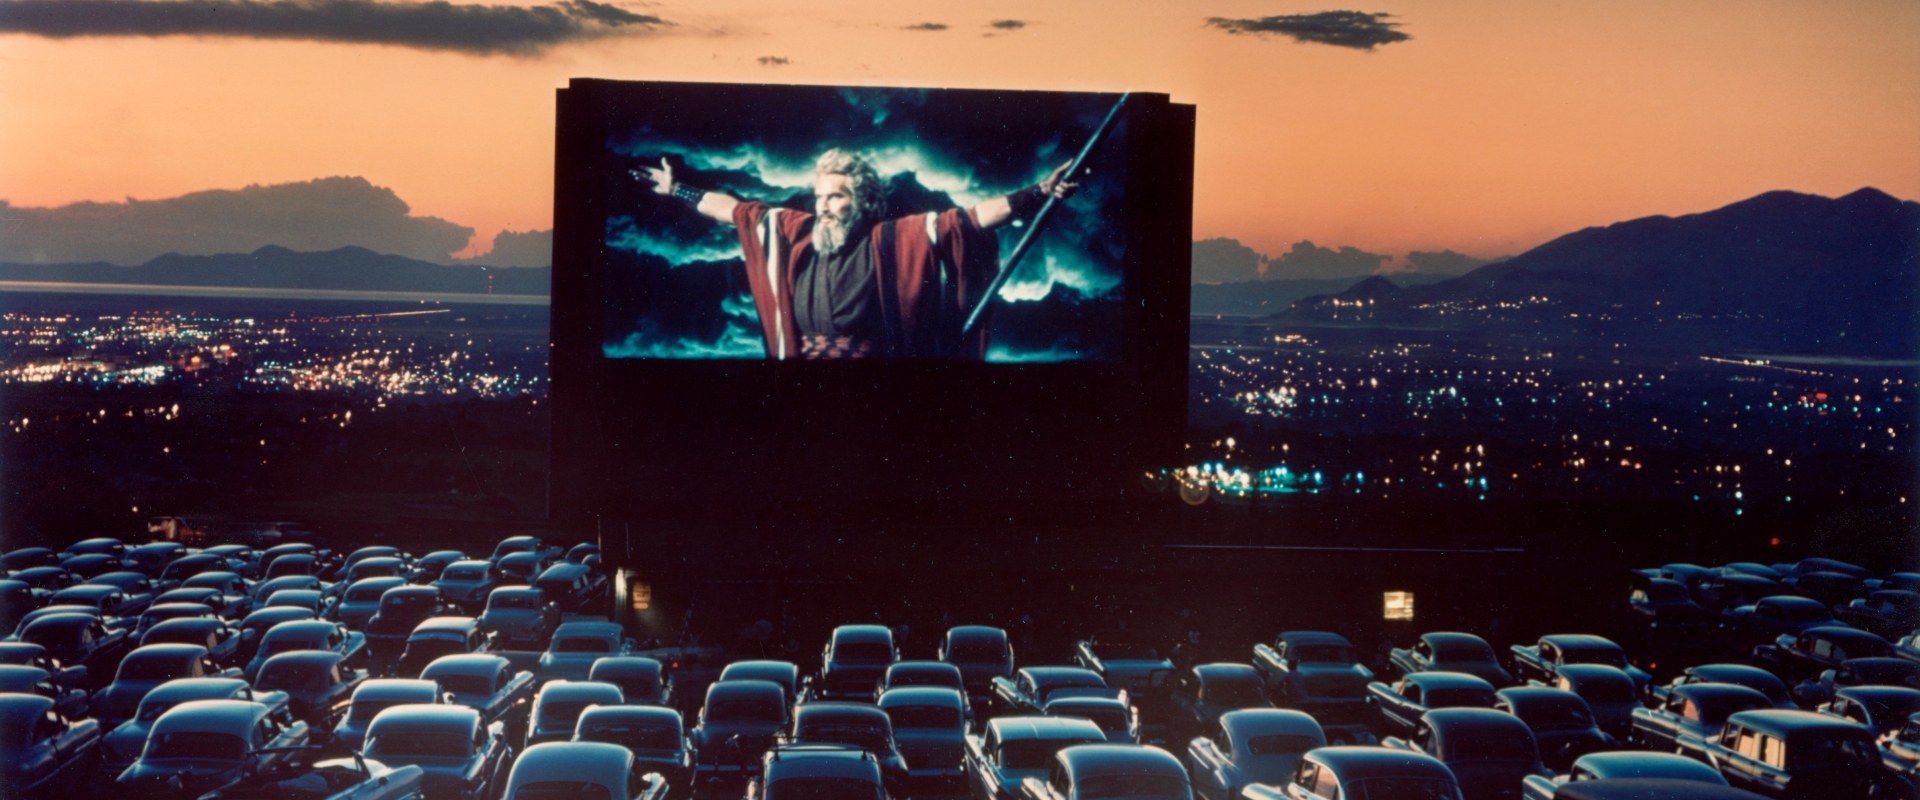 Veterans Special Screenings: Enjoy a Movie at a Drive-In Theater in Southern California